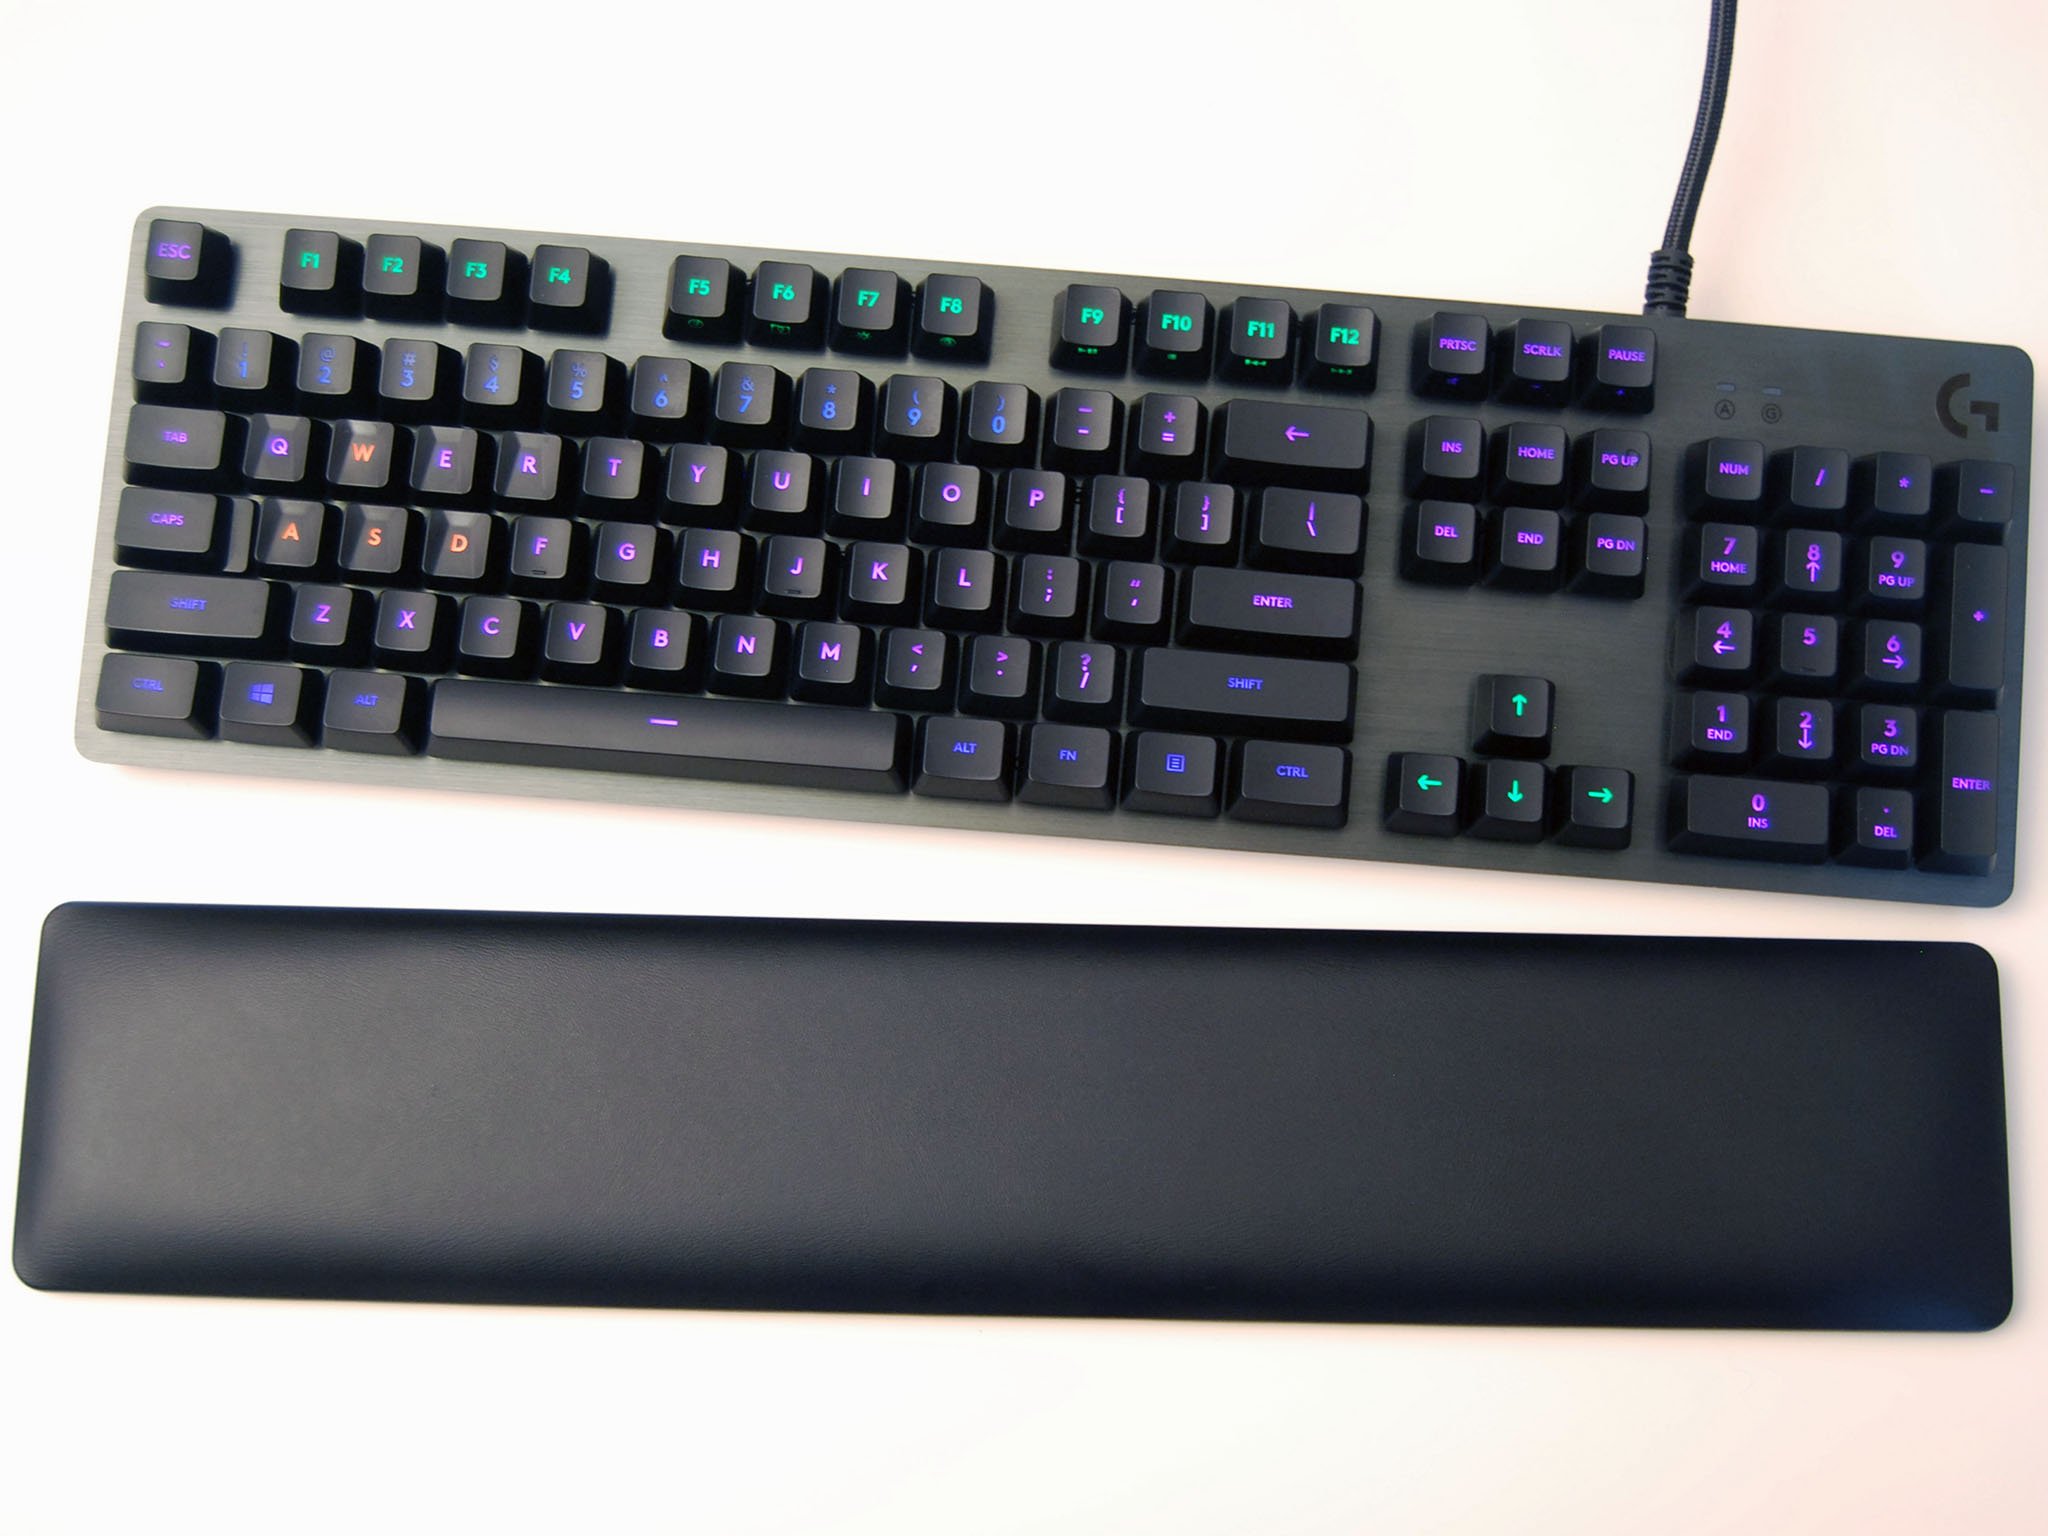 Sammenhængende investering justering Logitech G513 keyboard review: Stylish simplicity with premium performance  | Windows Central